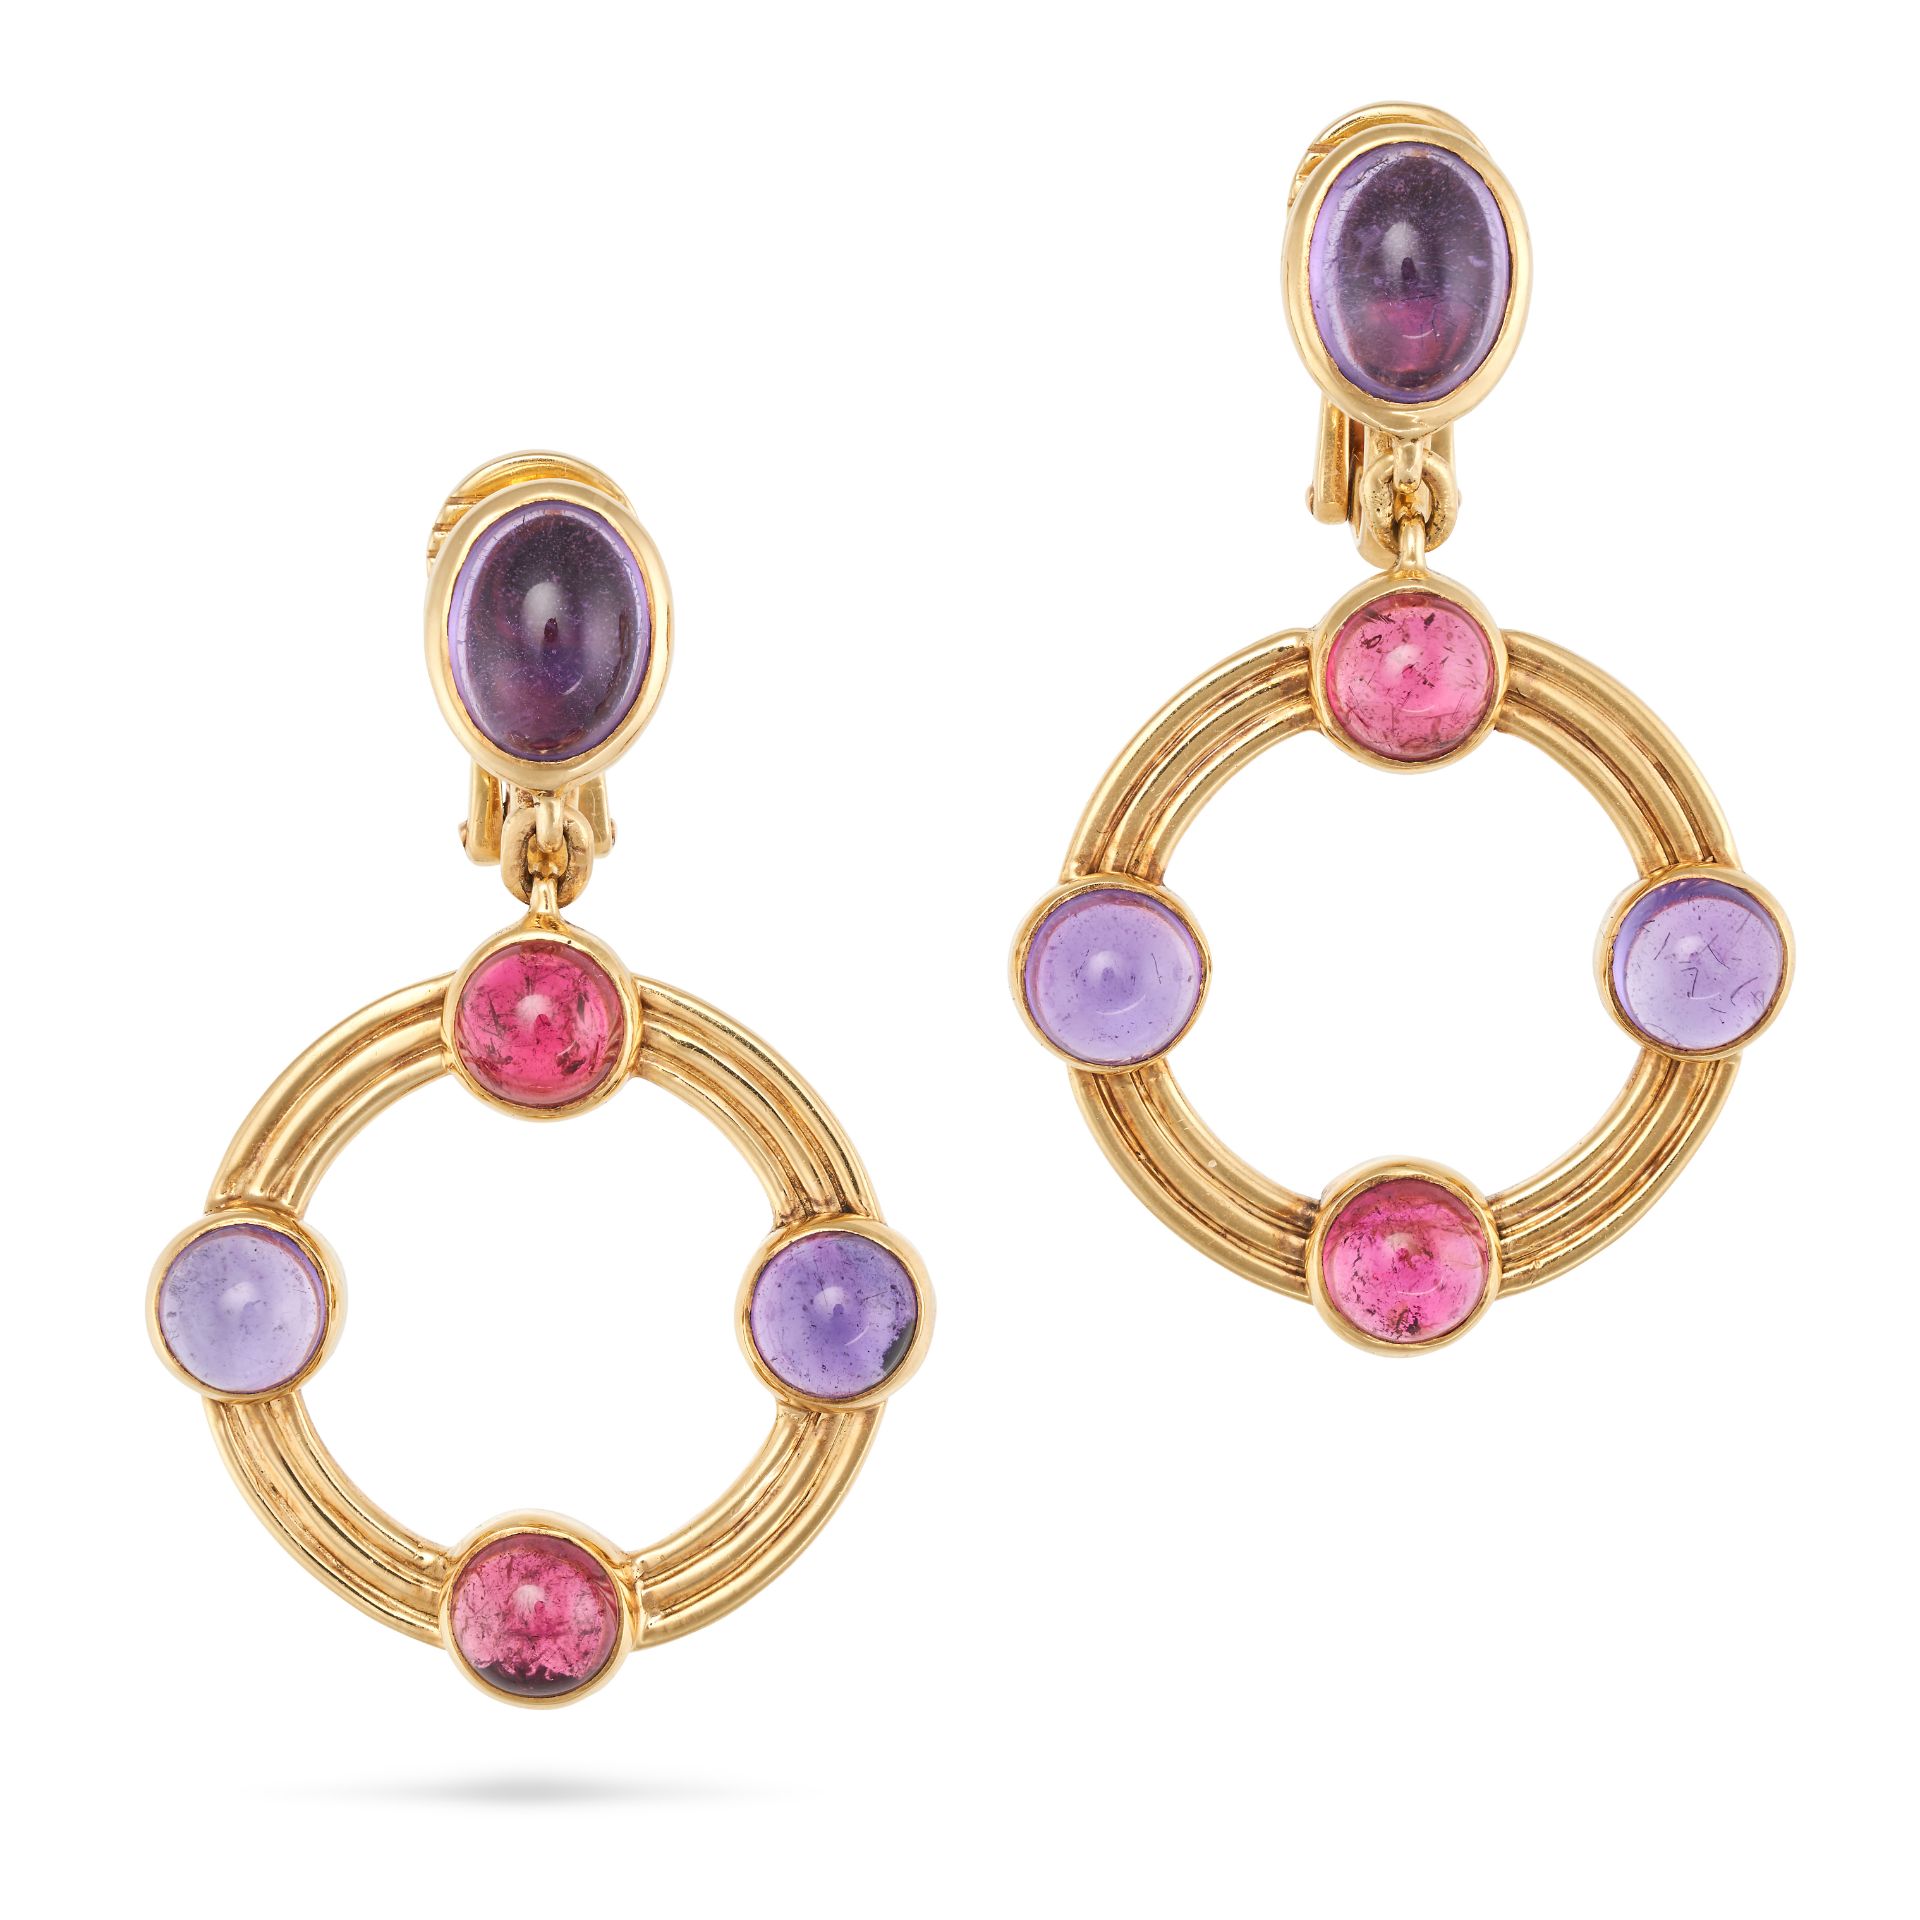 BULGARI, A PAIR OF AMETHYST AND PINK TOURMALINE DROP EARRINGS each set with an oval cabochon amet...